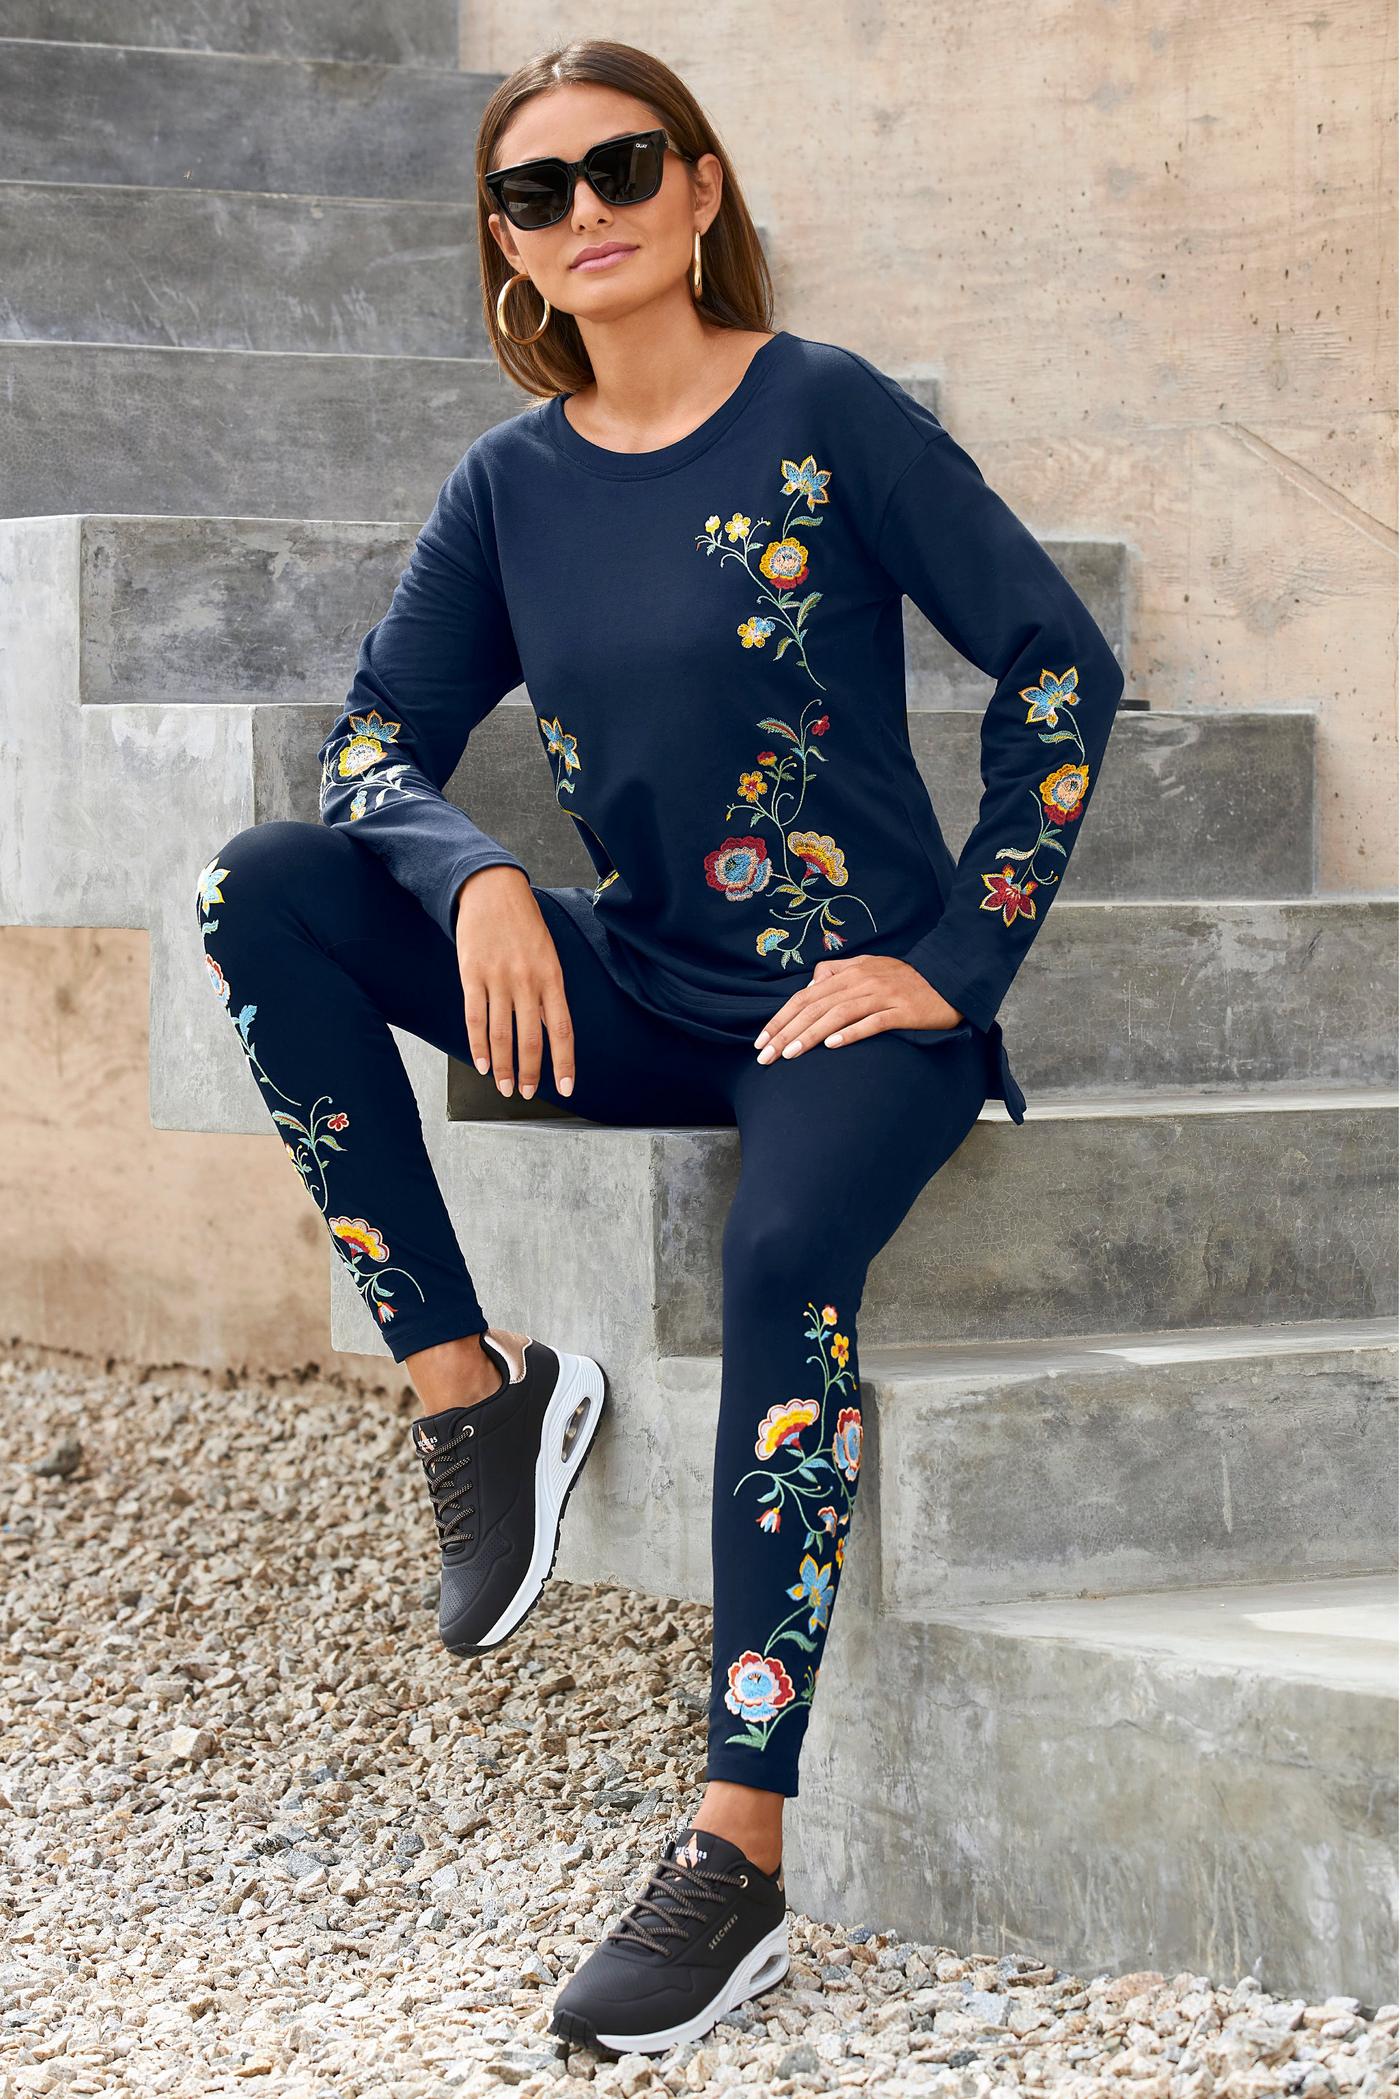 Miraflores Embroidered Legging - Stretchy Cotton Embroidered Legging